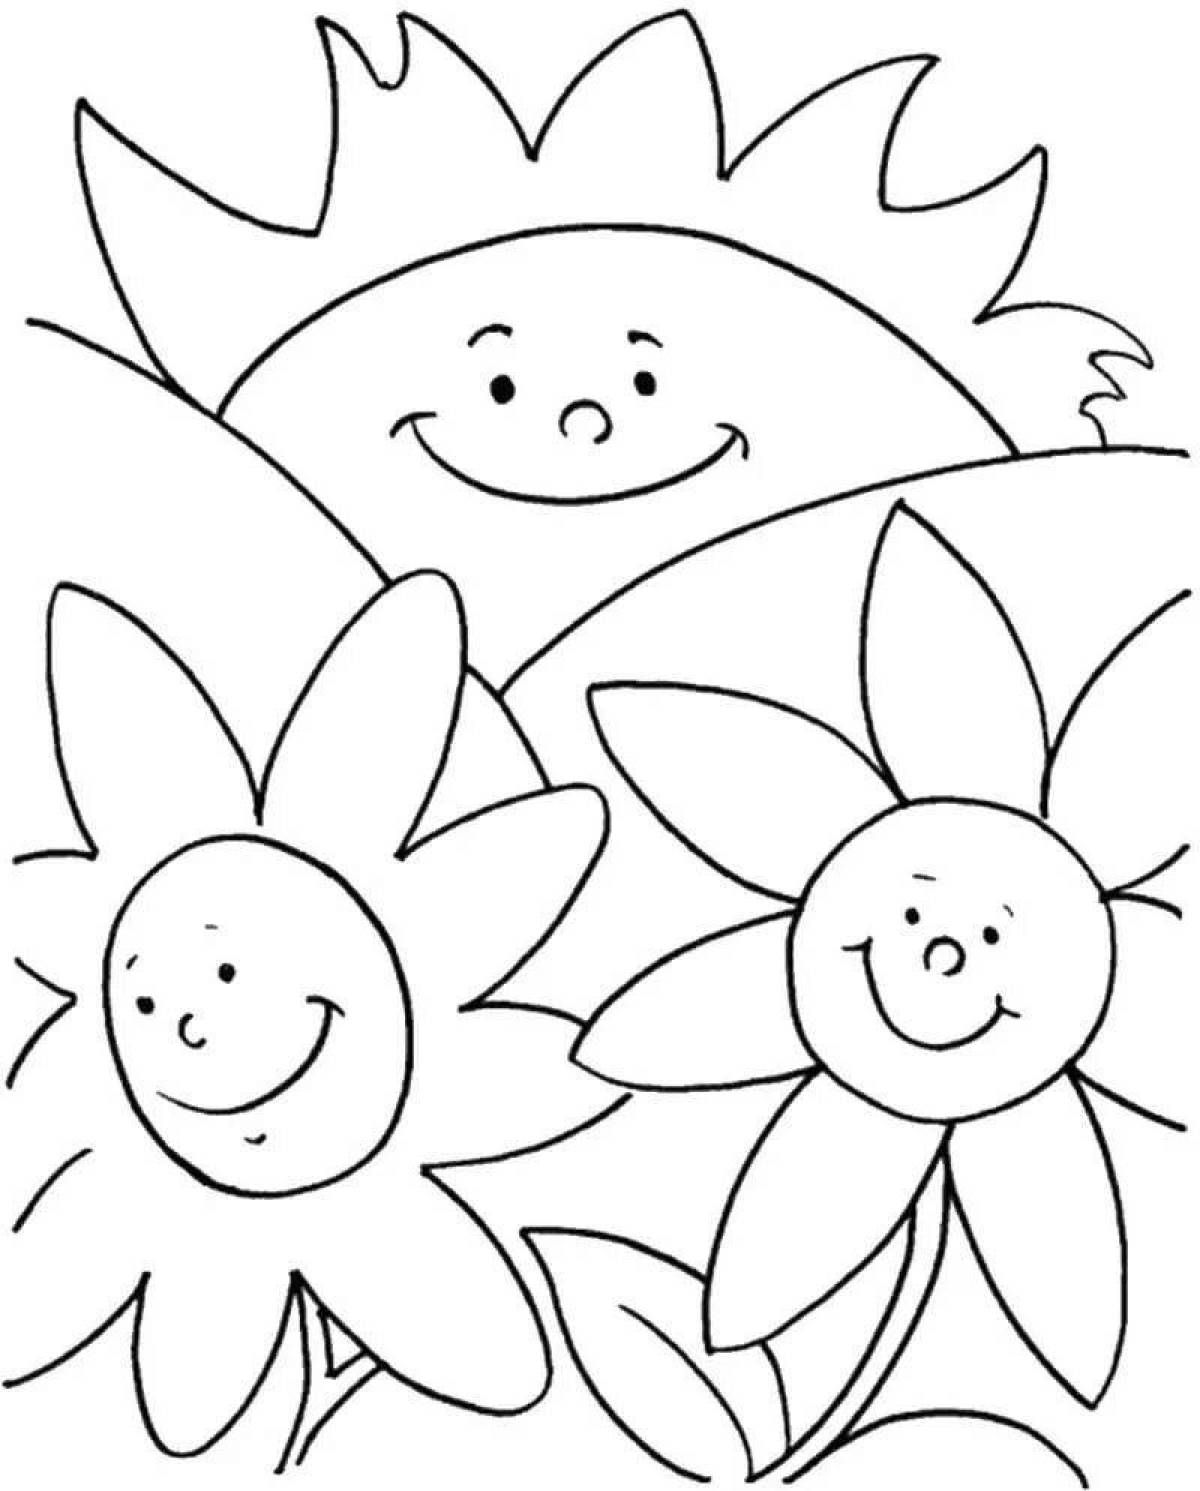 Refreshing summer coloring book